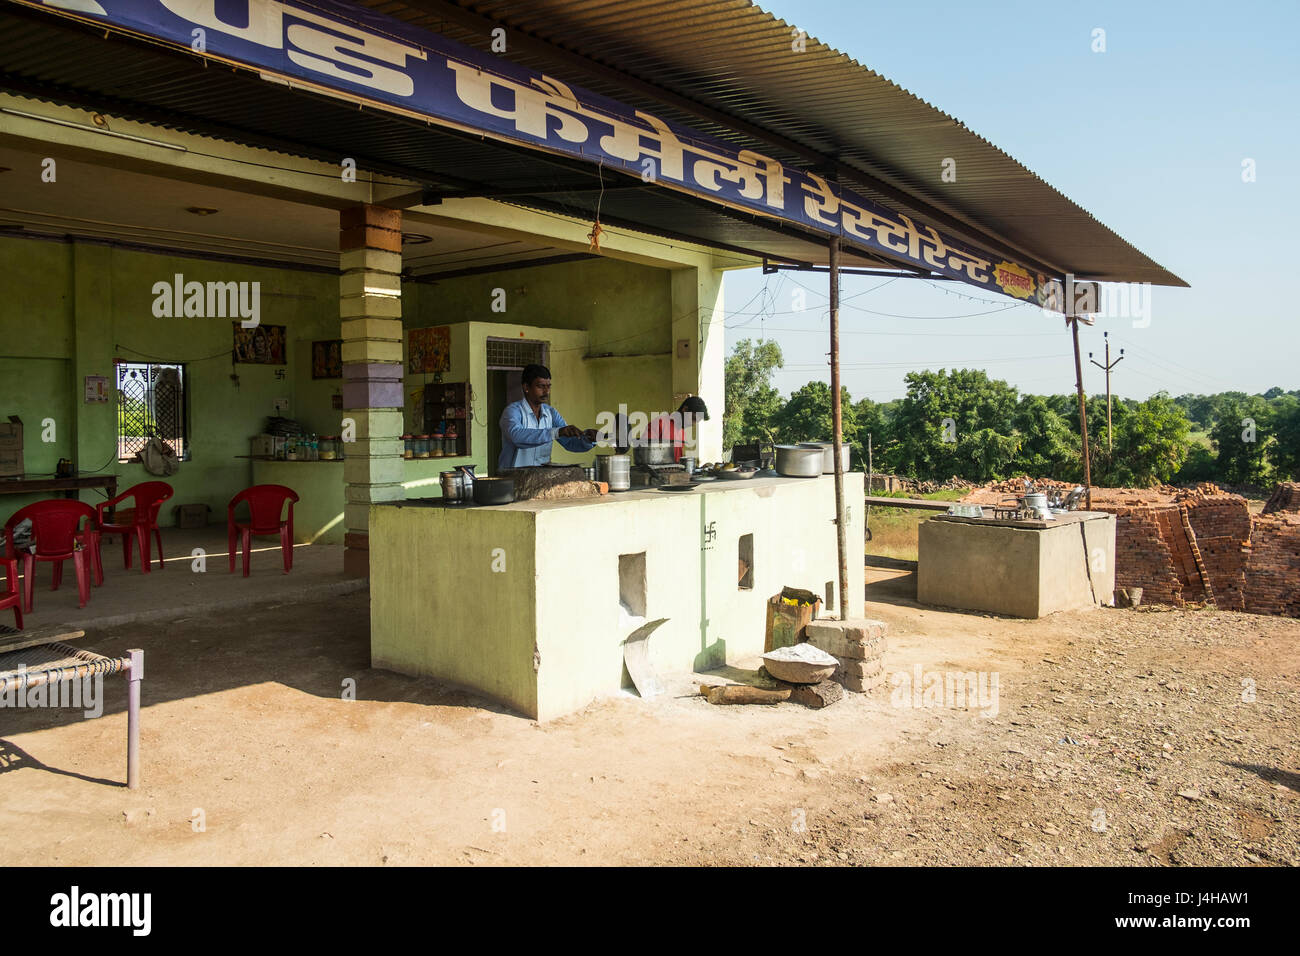 A typical roadside eatery, also called Dhaba on the National Highway 8